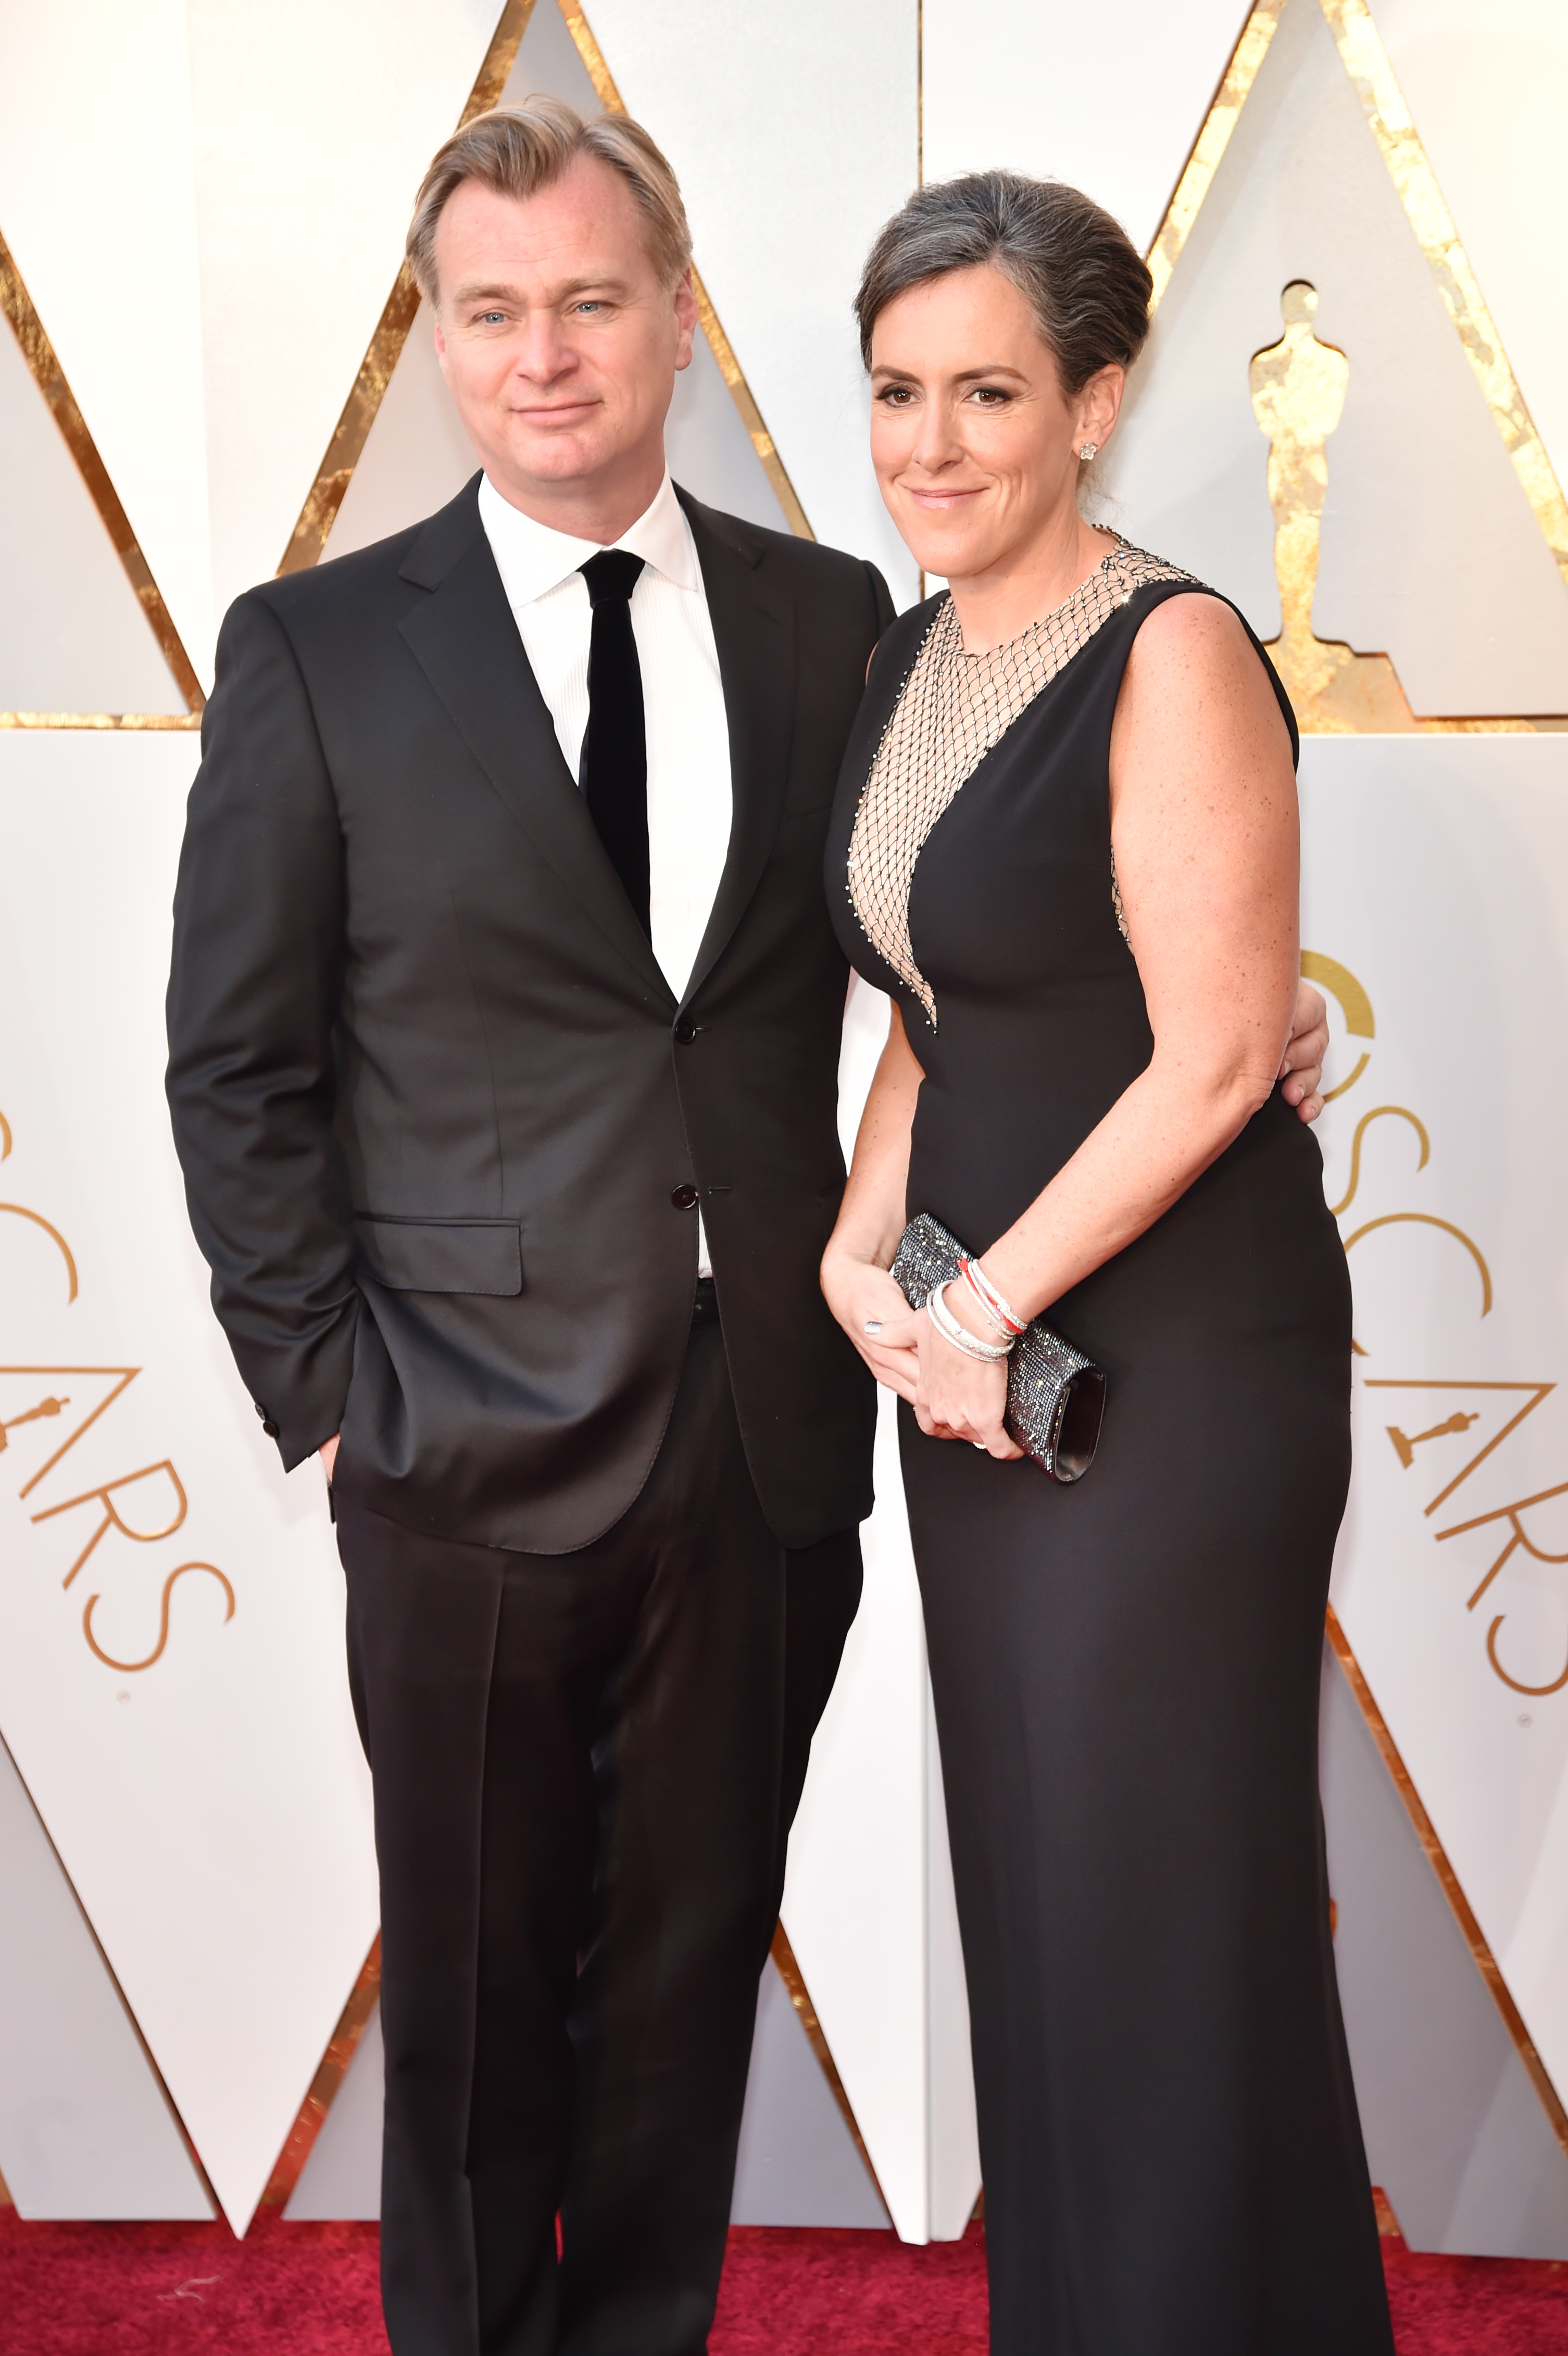 Emma Thomas and Christopher Nolan at the Annual Academy Awards on March 4, 2018, in Hollywood.│ Source: Getty Images